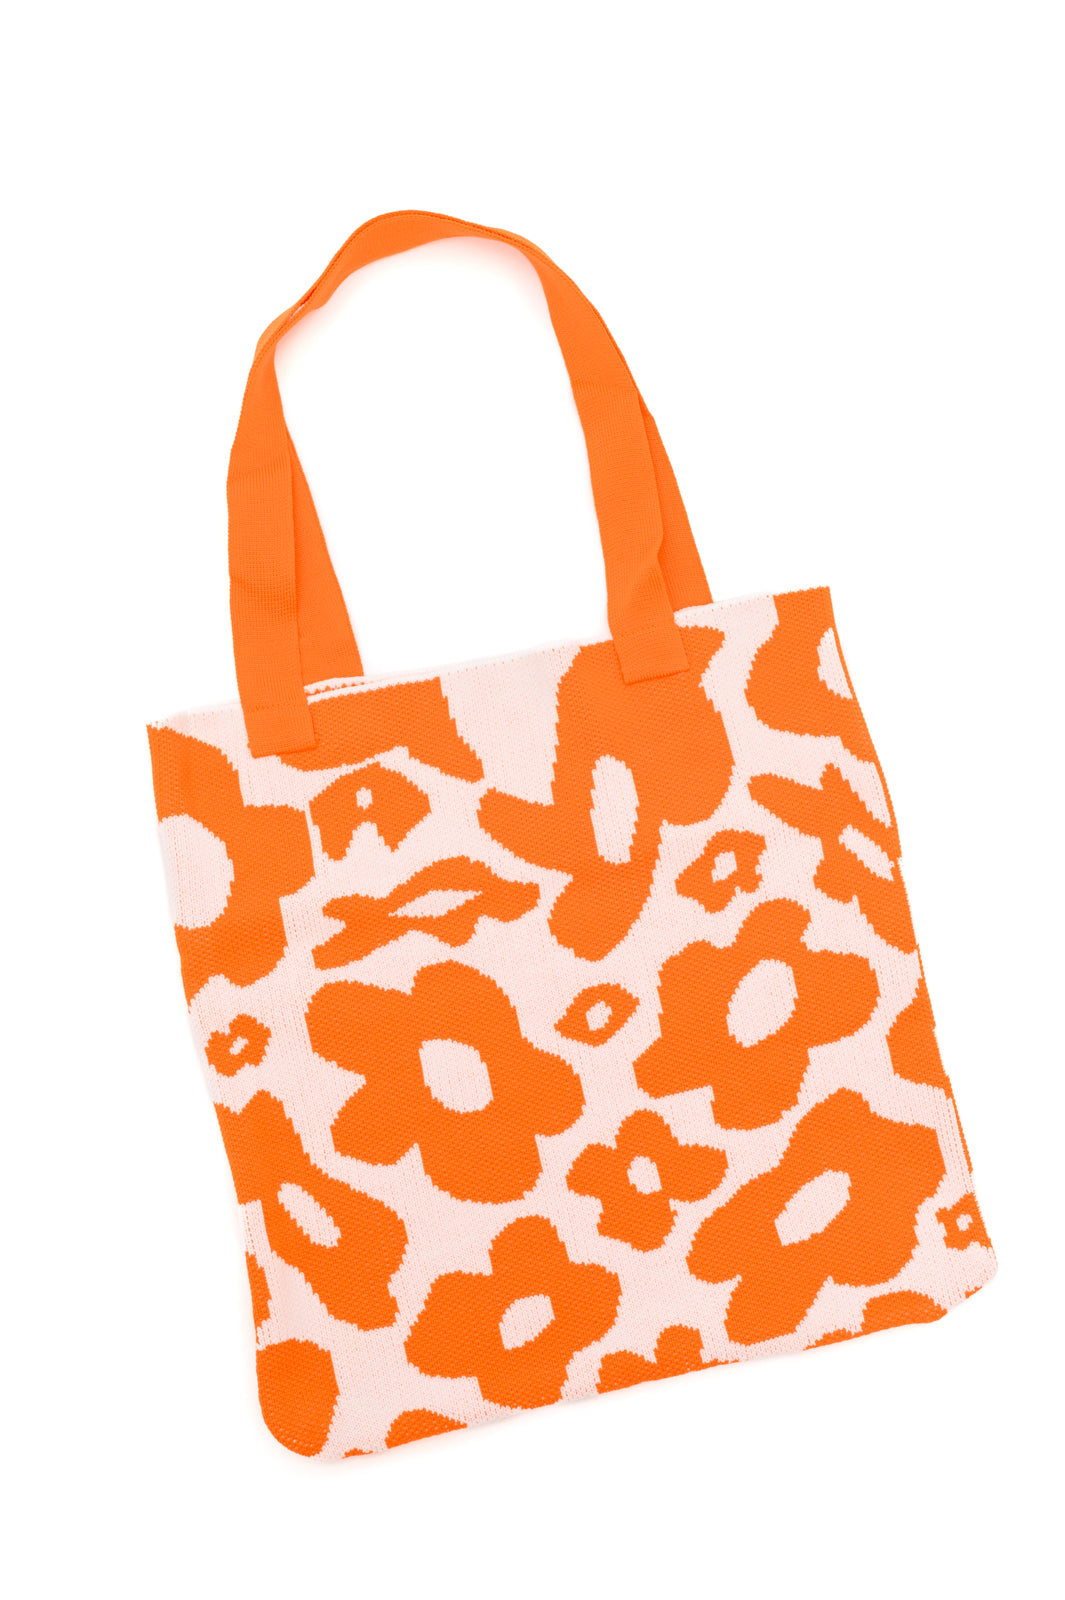 Lazy Daisy Knit Bag in Orange - WEBSITE EXCLUSIVE